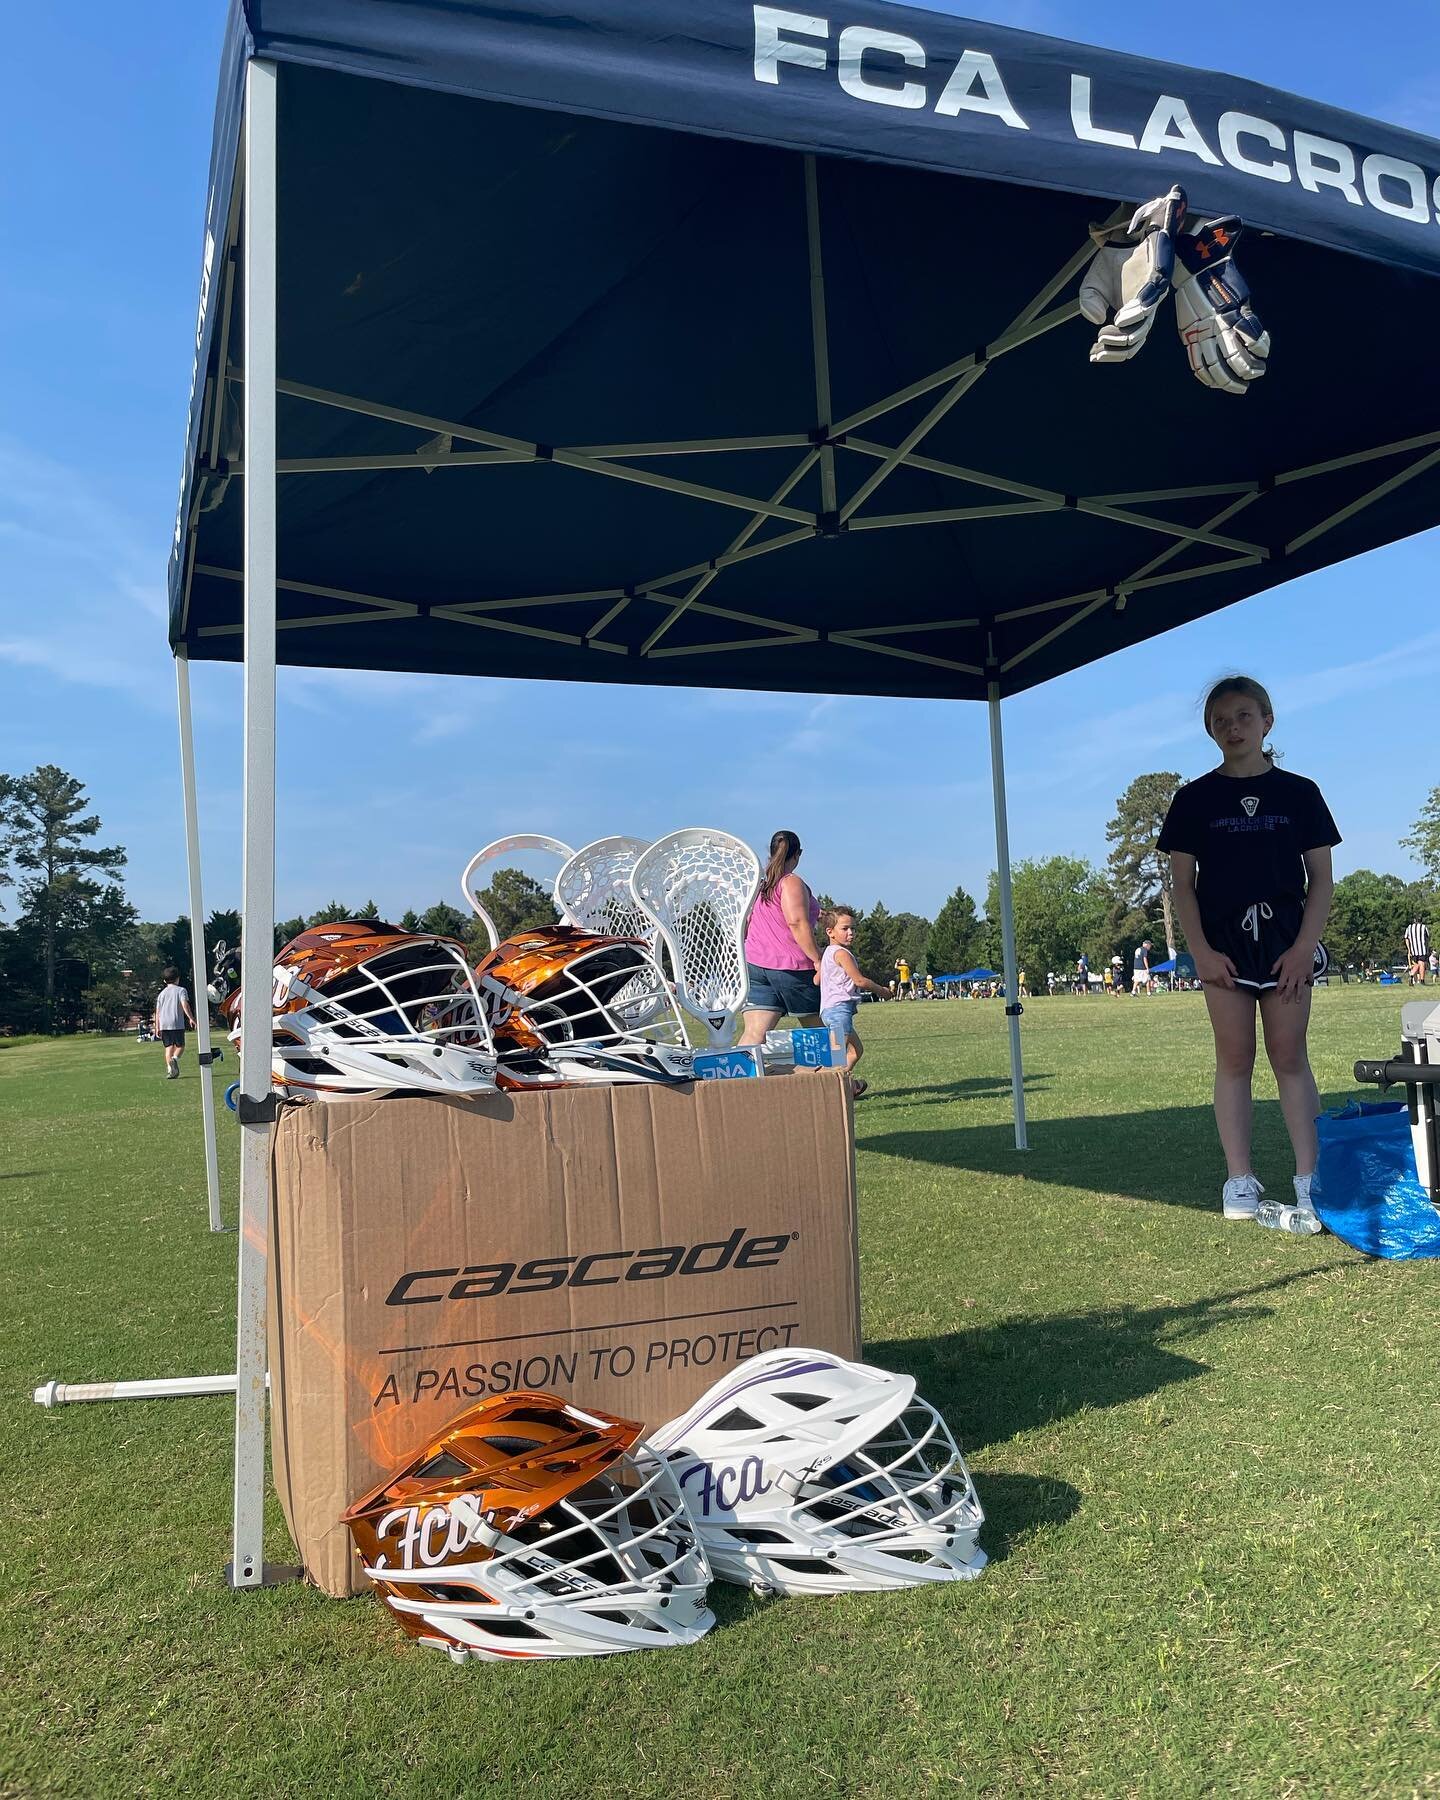 Stop by the FCA tent by field 9 at the @coastalcrushlax for a chance to win an @fcalacrosse helmet or @ecdlax heads!